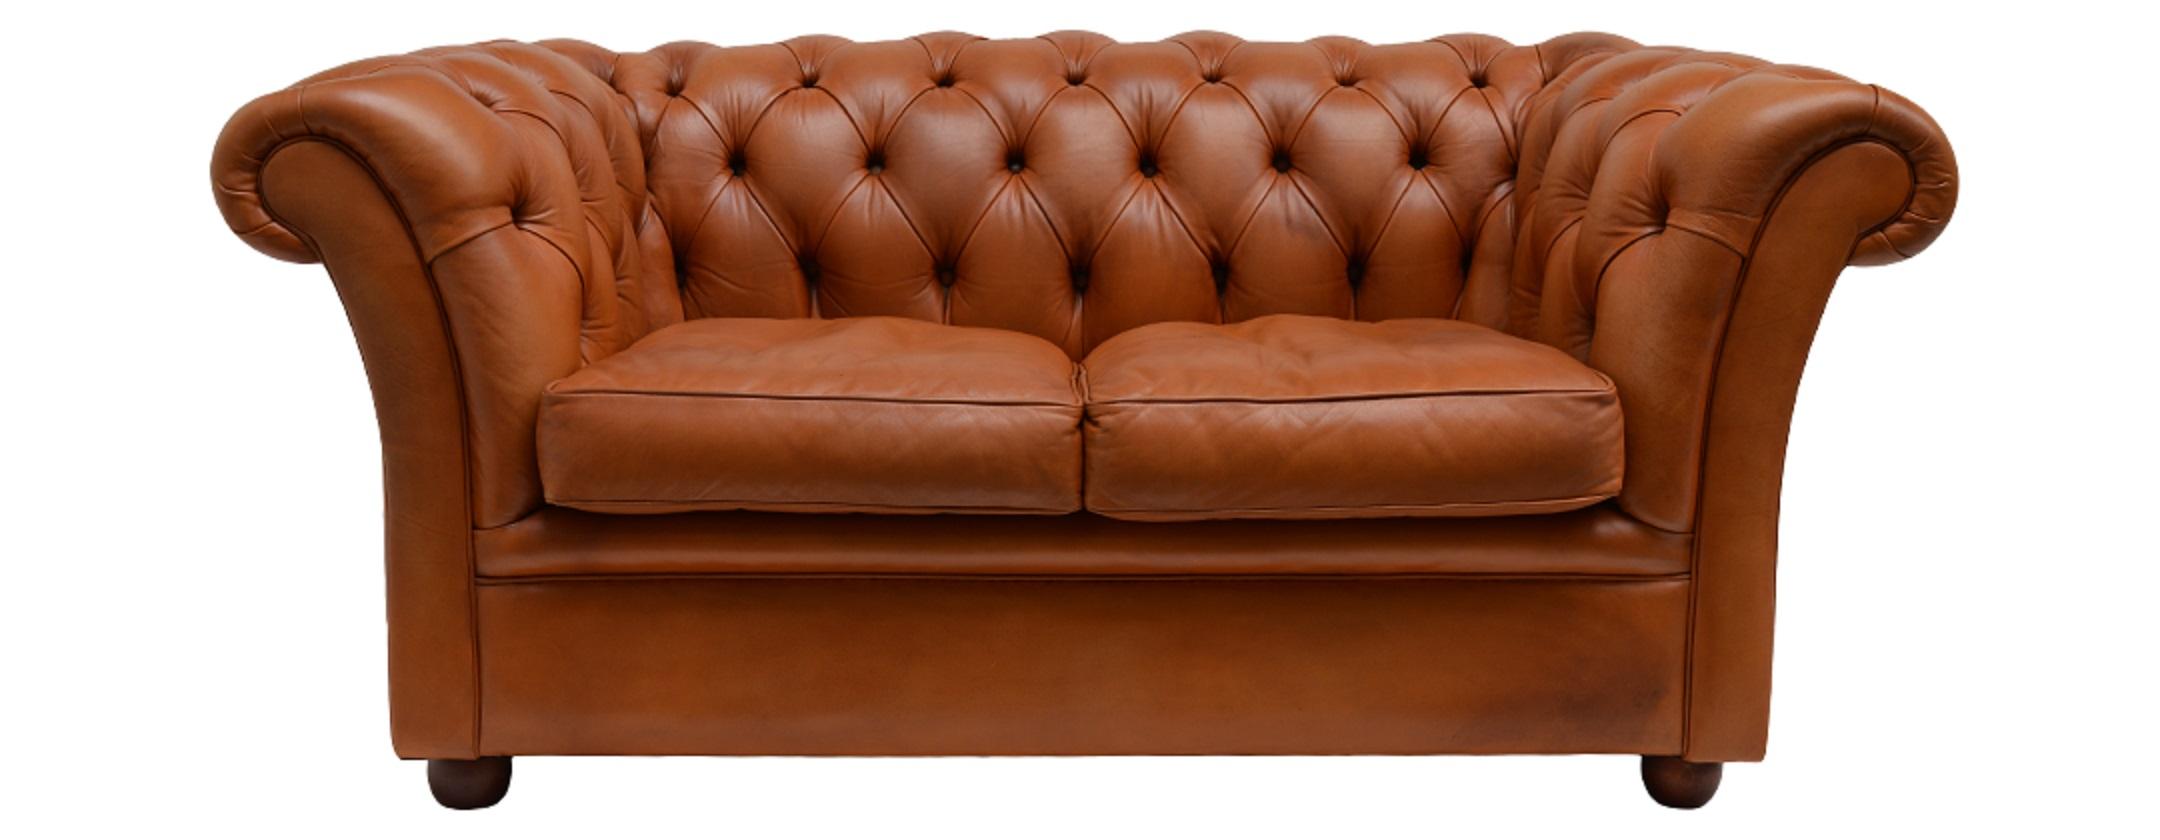 Original Delta Chesterfield 3+2 Settee in Cognac Cowhide In Good Condition For Sale In Eindhoven, NL